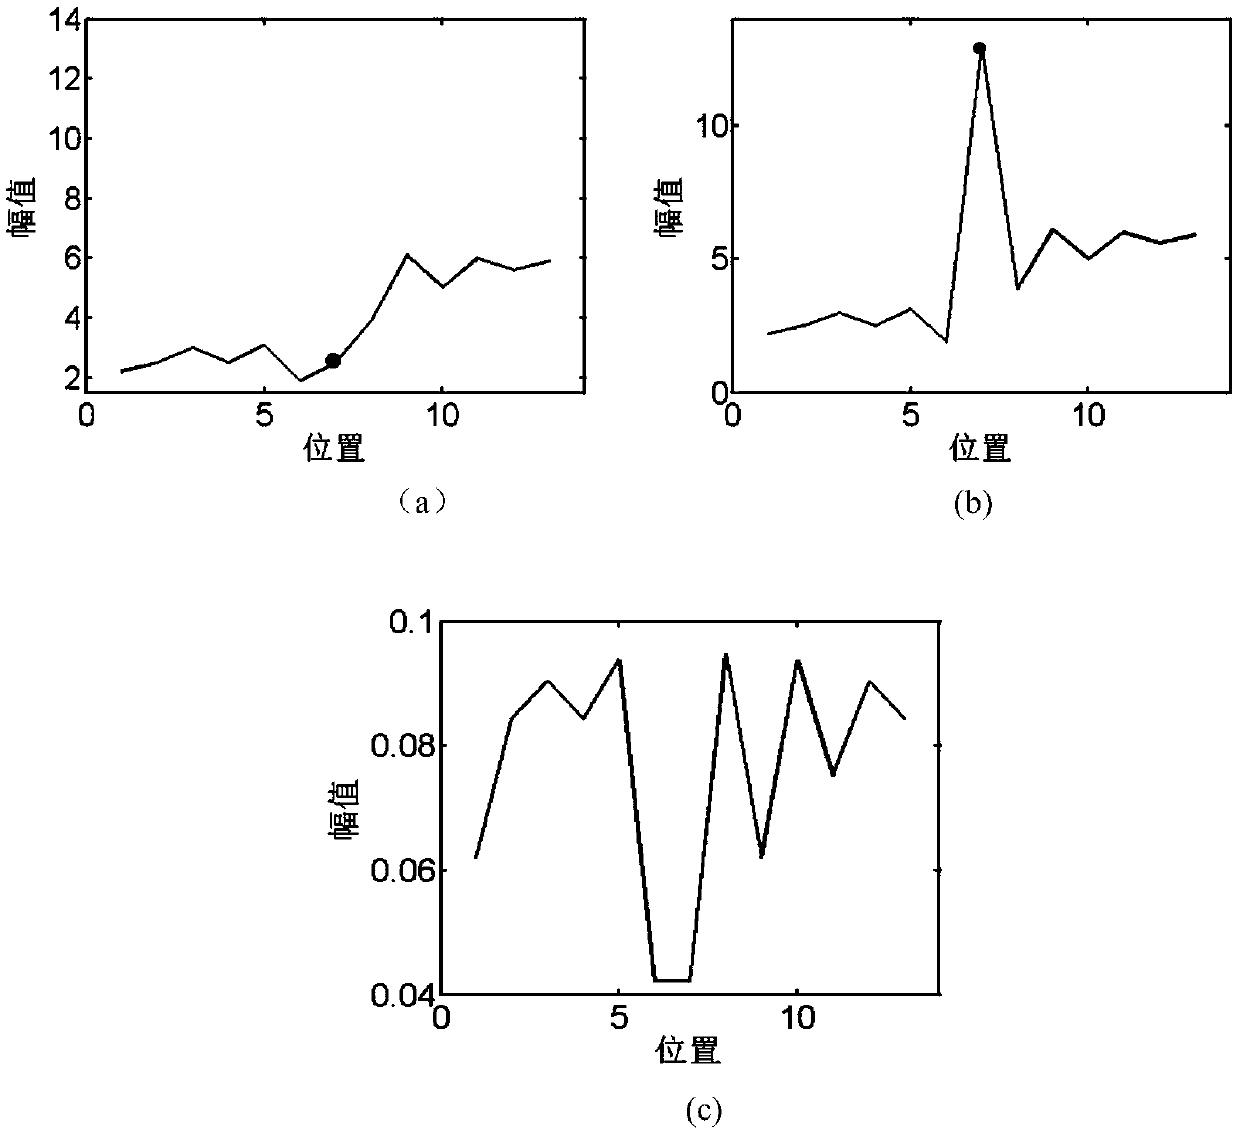 An Information Entropy Filter and Random Noise Attenuation Method for Seismic Data